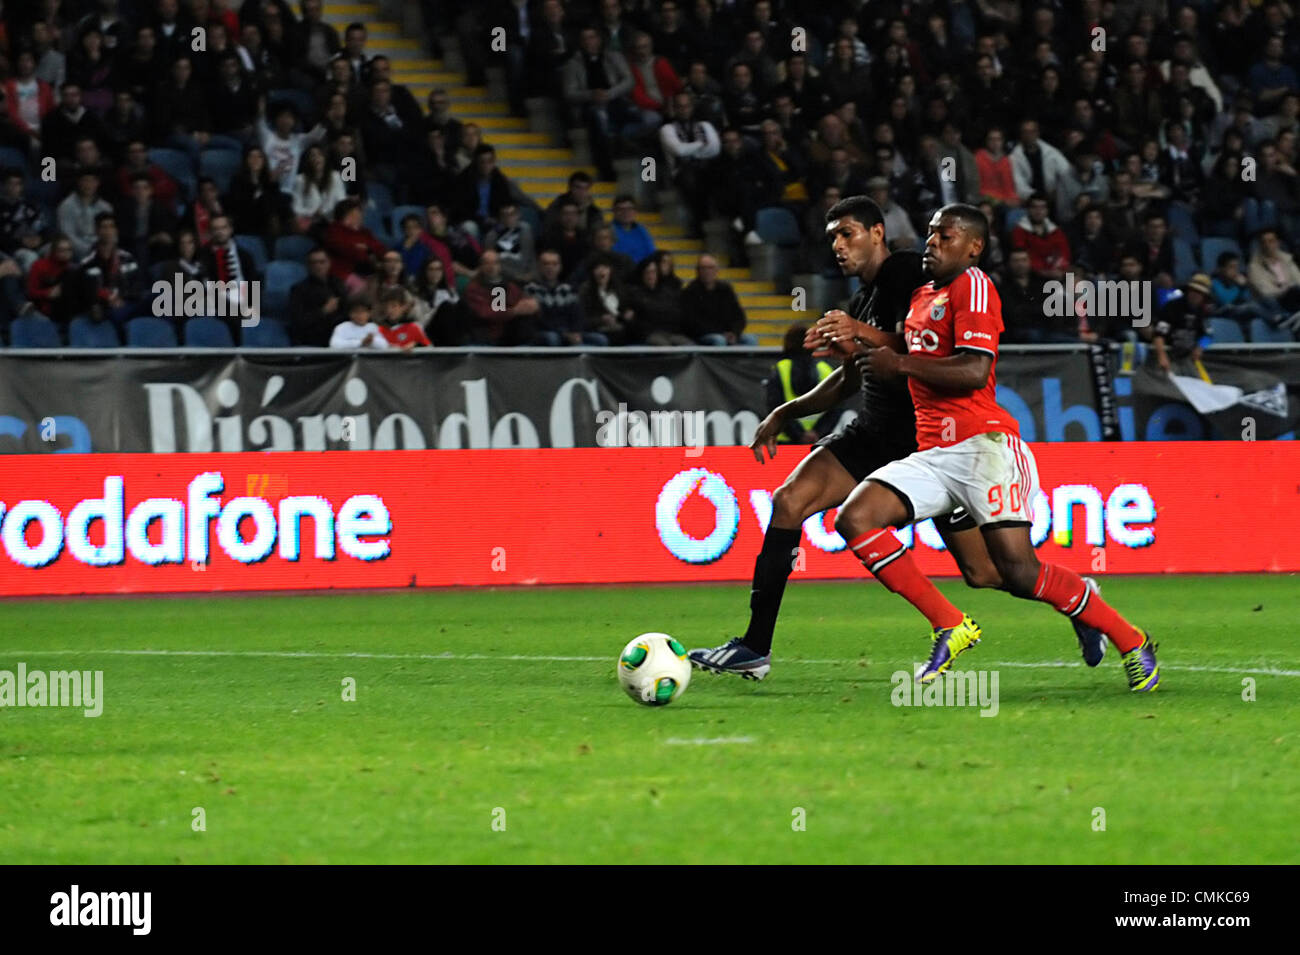 Benfica's Ivan Cavaleiro vies for the ball with an Academica defender during the portuguese Liga Sagres football match between Academica and Benfica Stock Photo